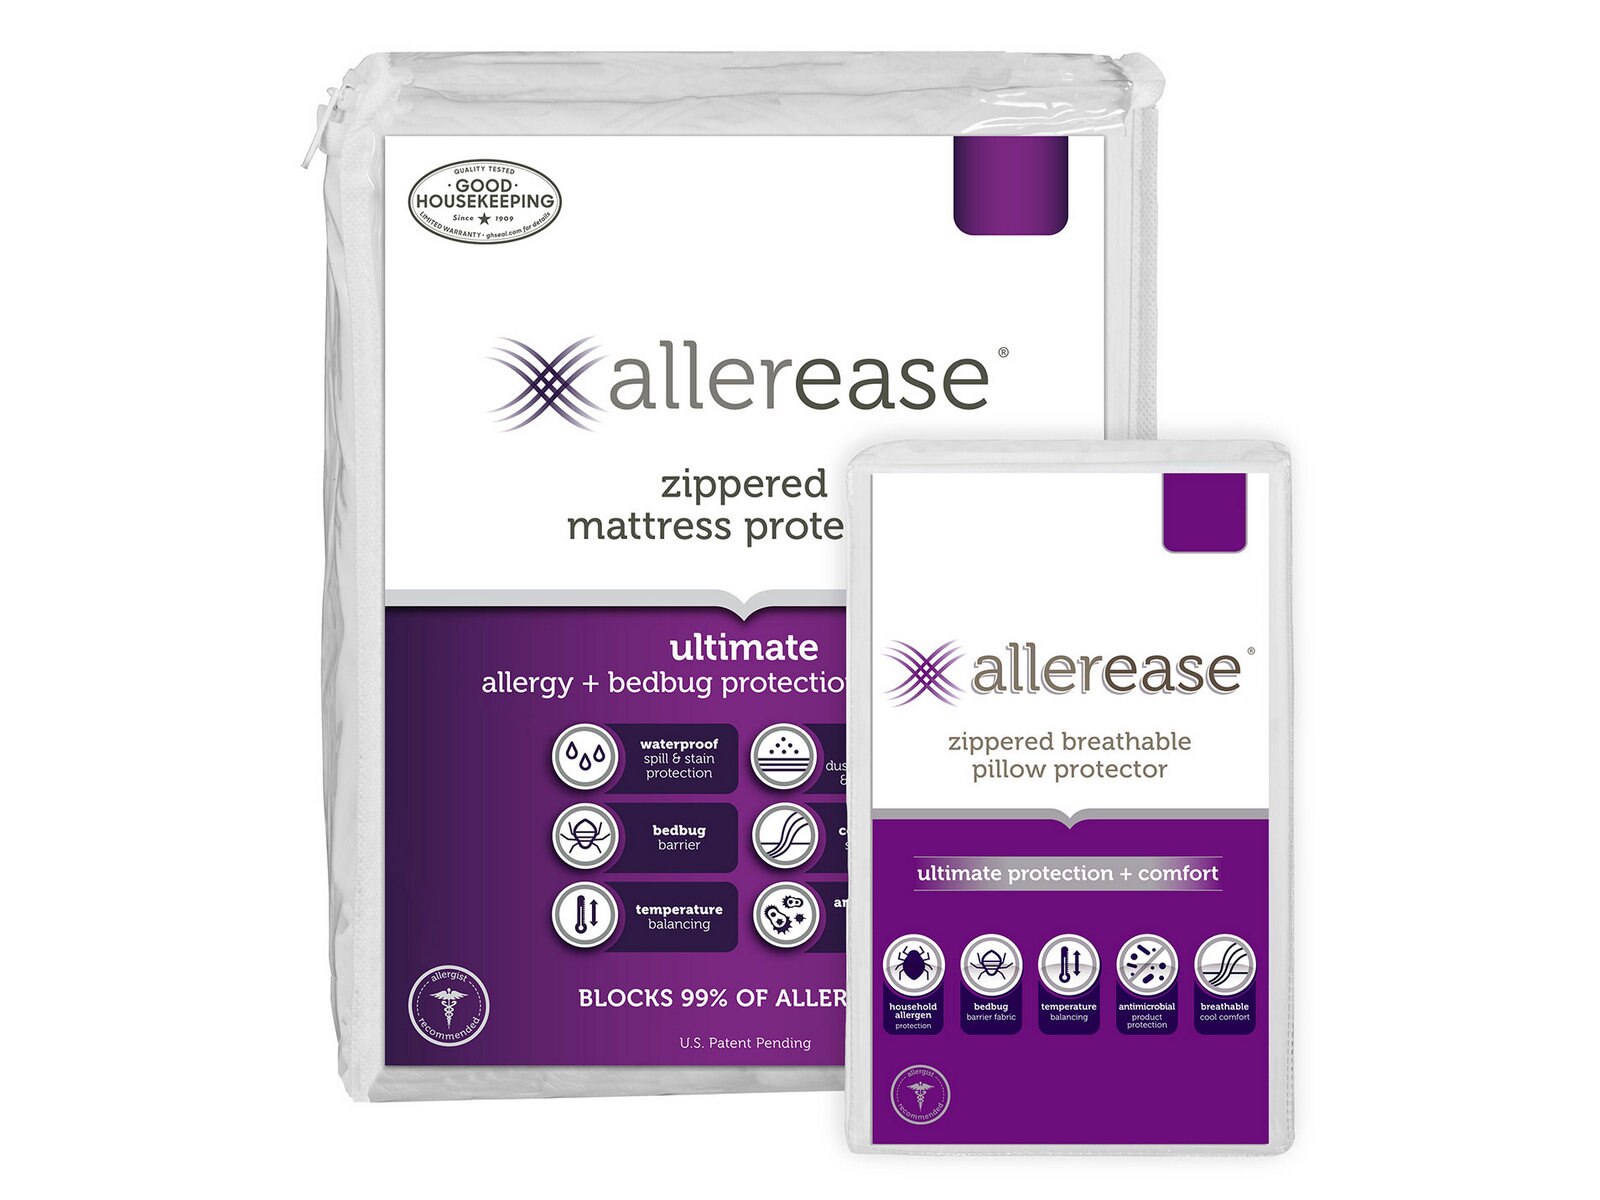 ultimate mattress protector - allerease